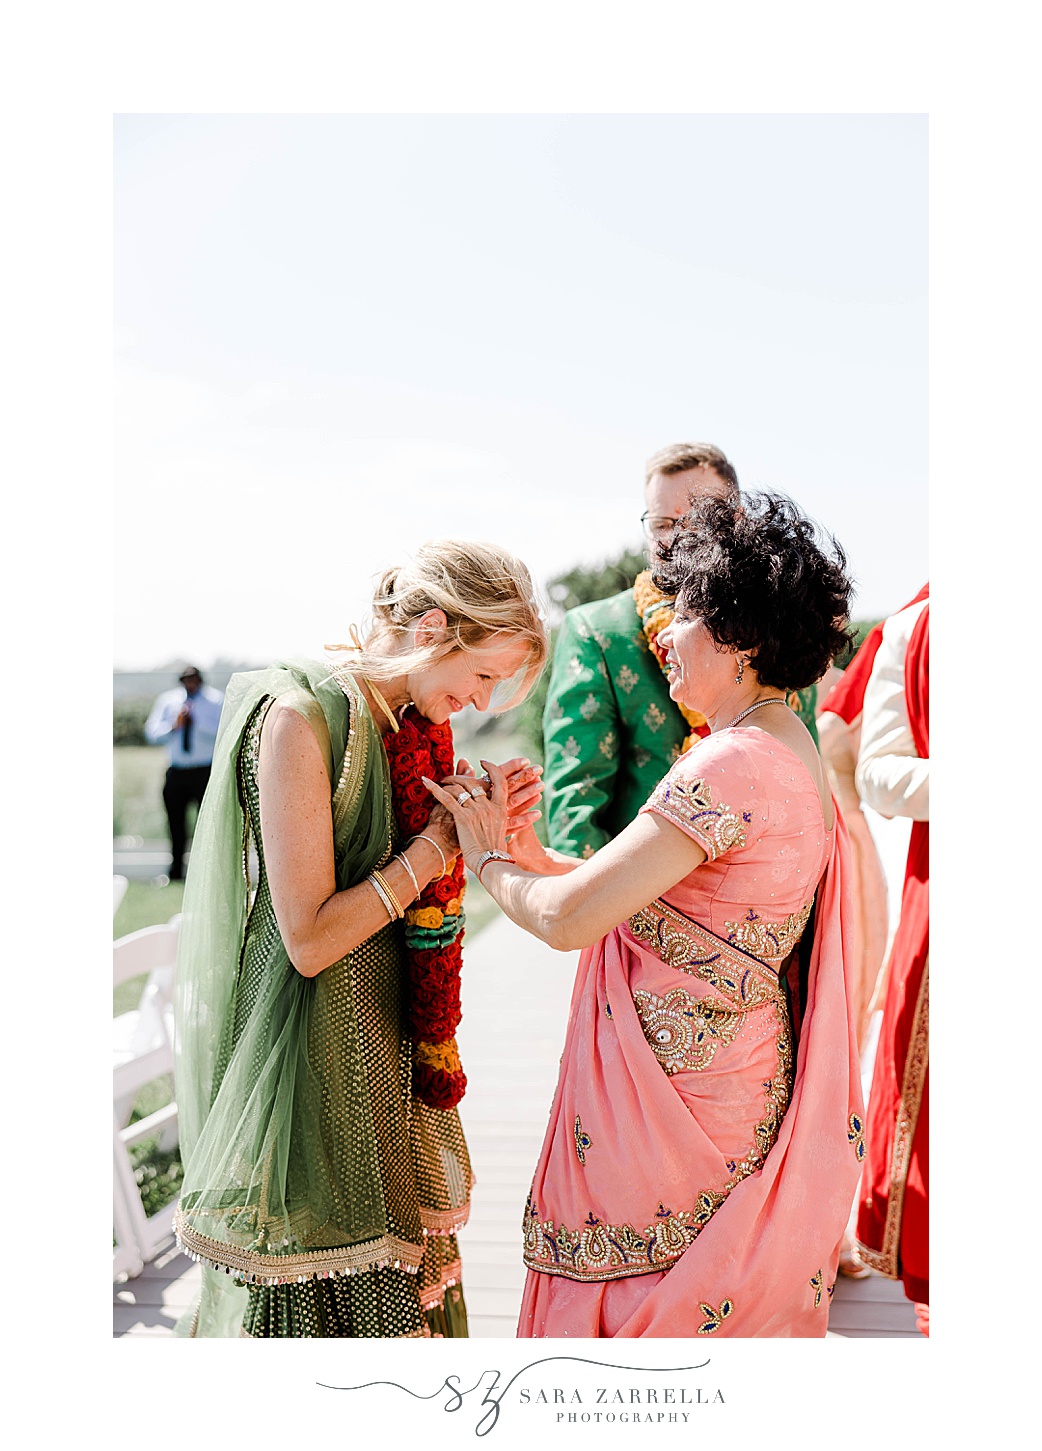 mothers hold hands during traditional Indian wedding ceremony at Newport Beach House